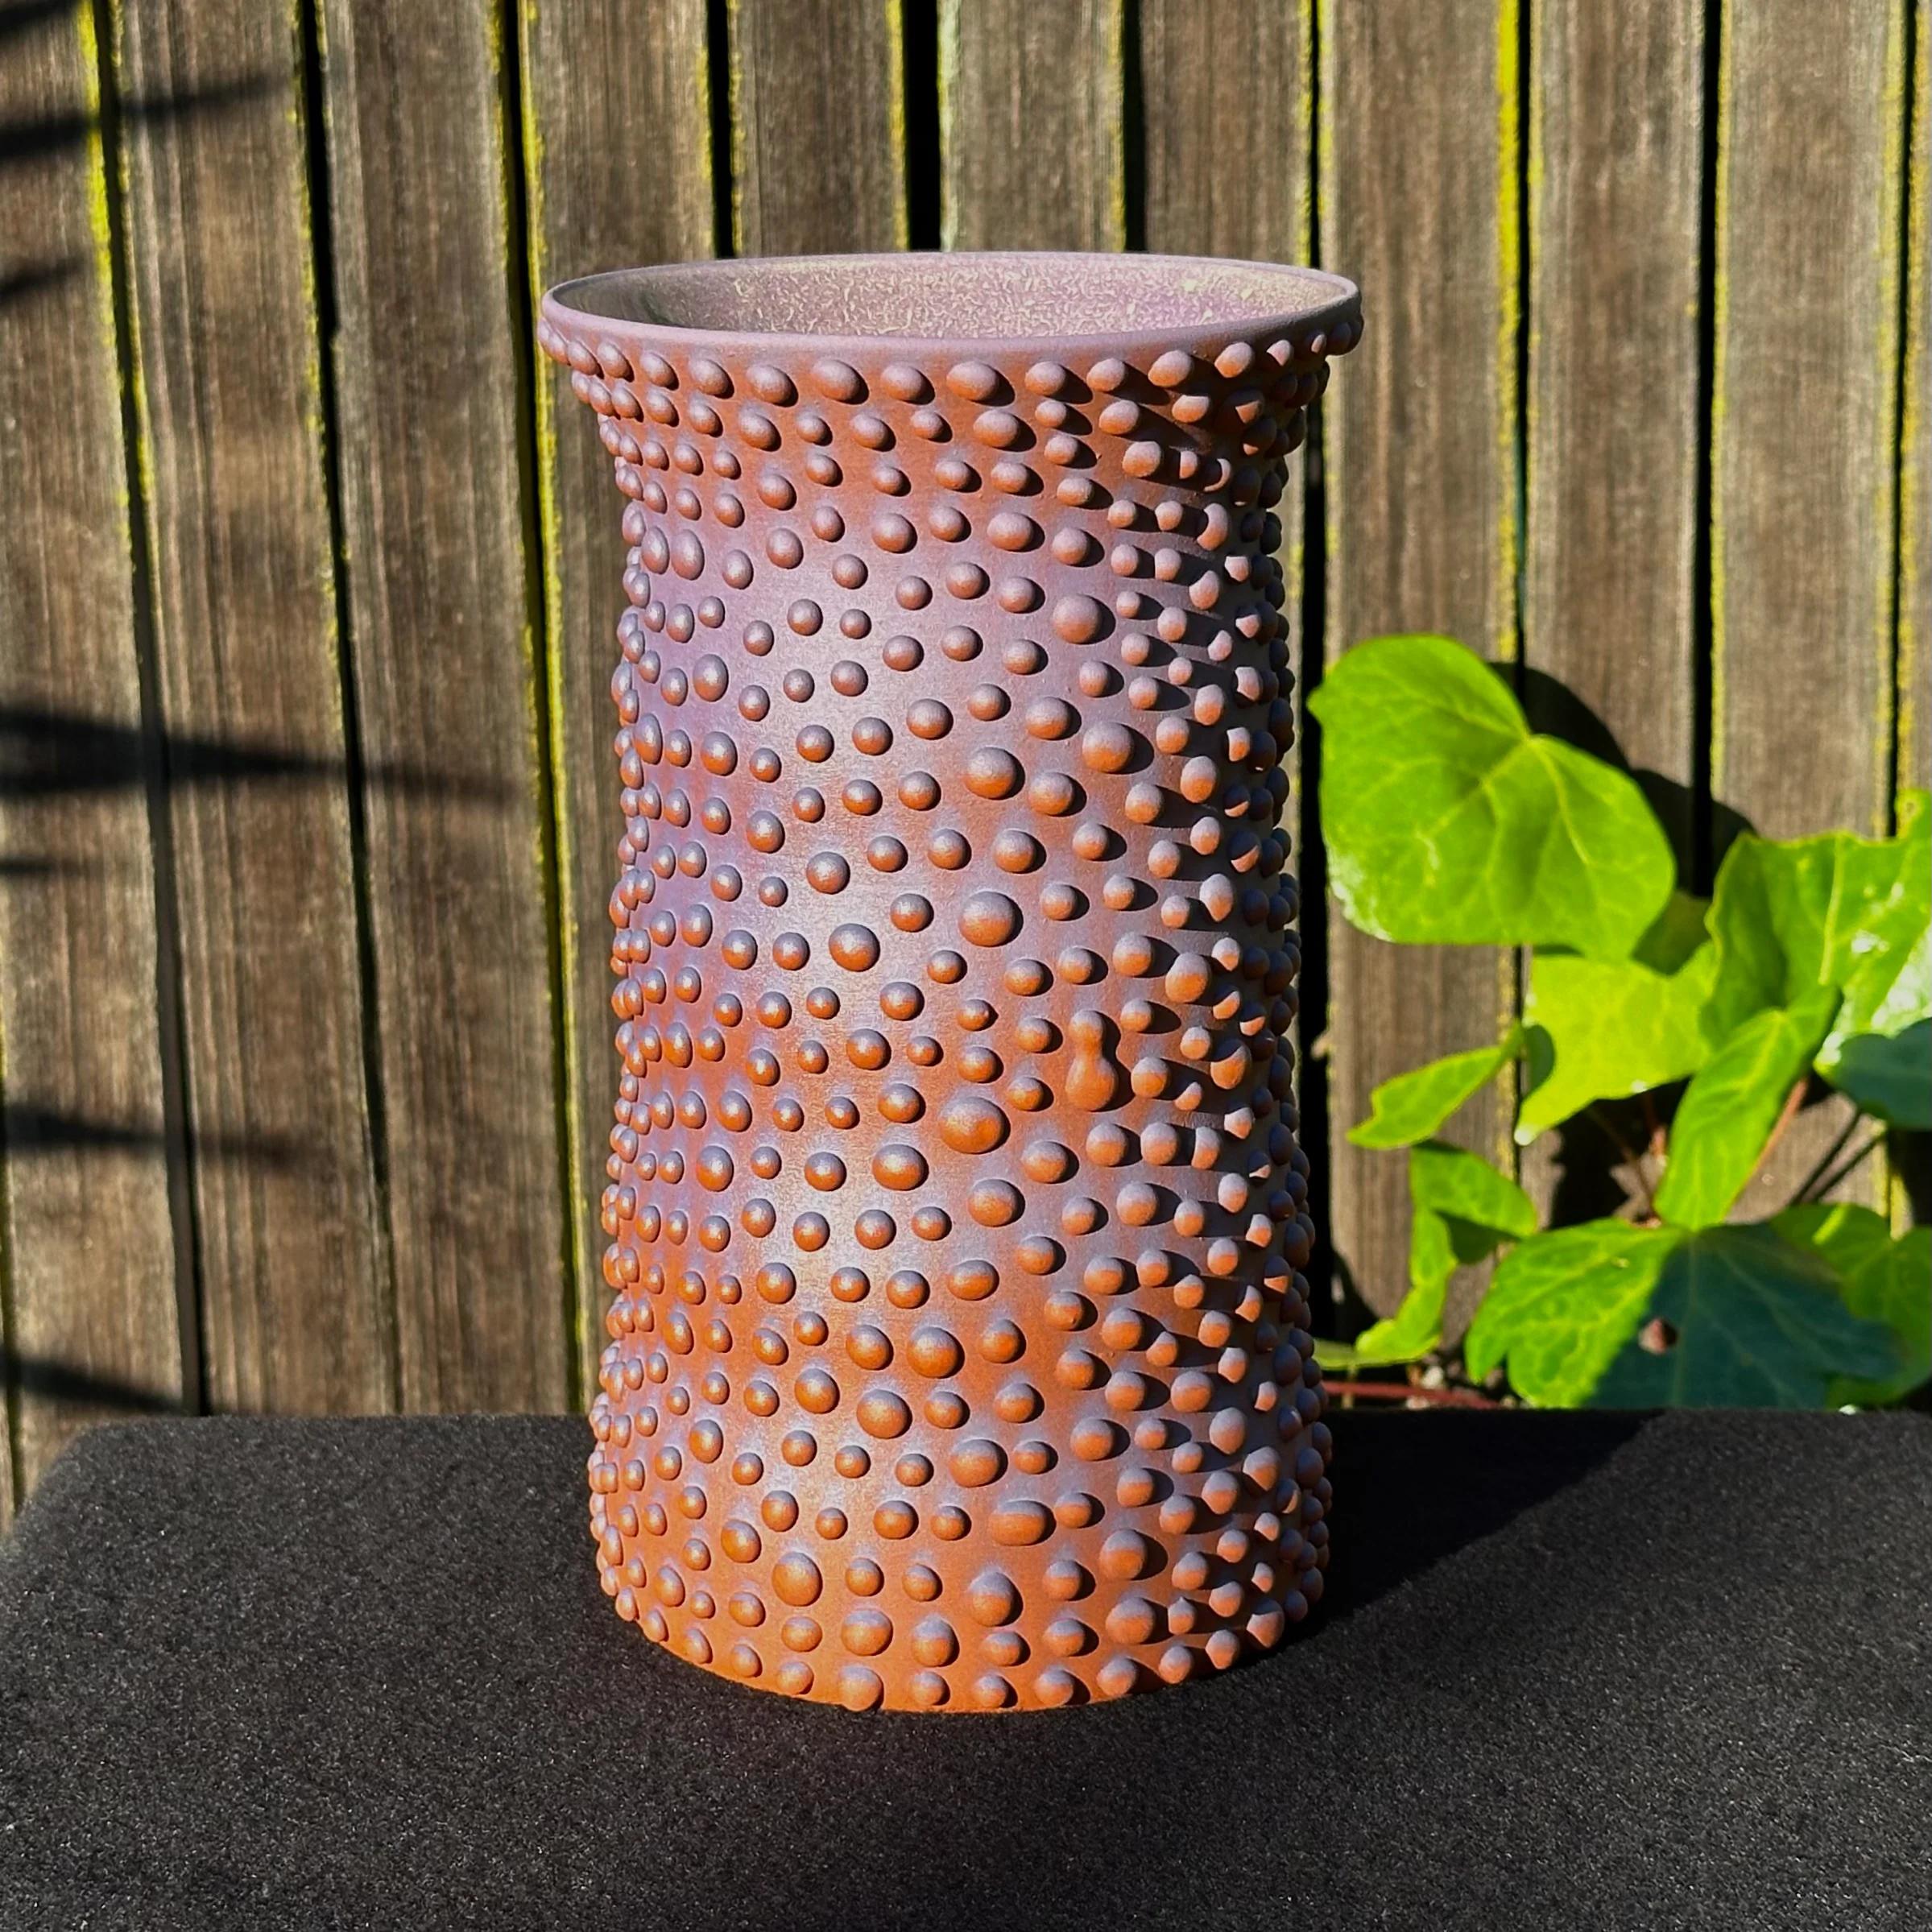 Designed and manufactured by Oakland artist Justin Kiene, these organic planters and vases are inspired by the shapes of the natural and microscopic world.

Each piece is hand thrown and glazed, making it unique in tone, shape and finish.

Origin: